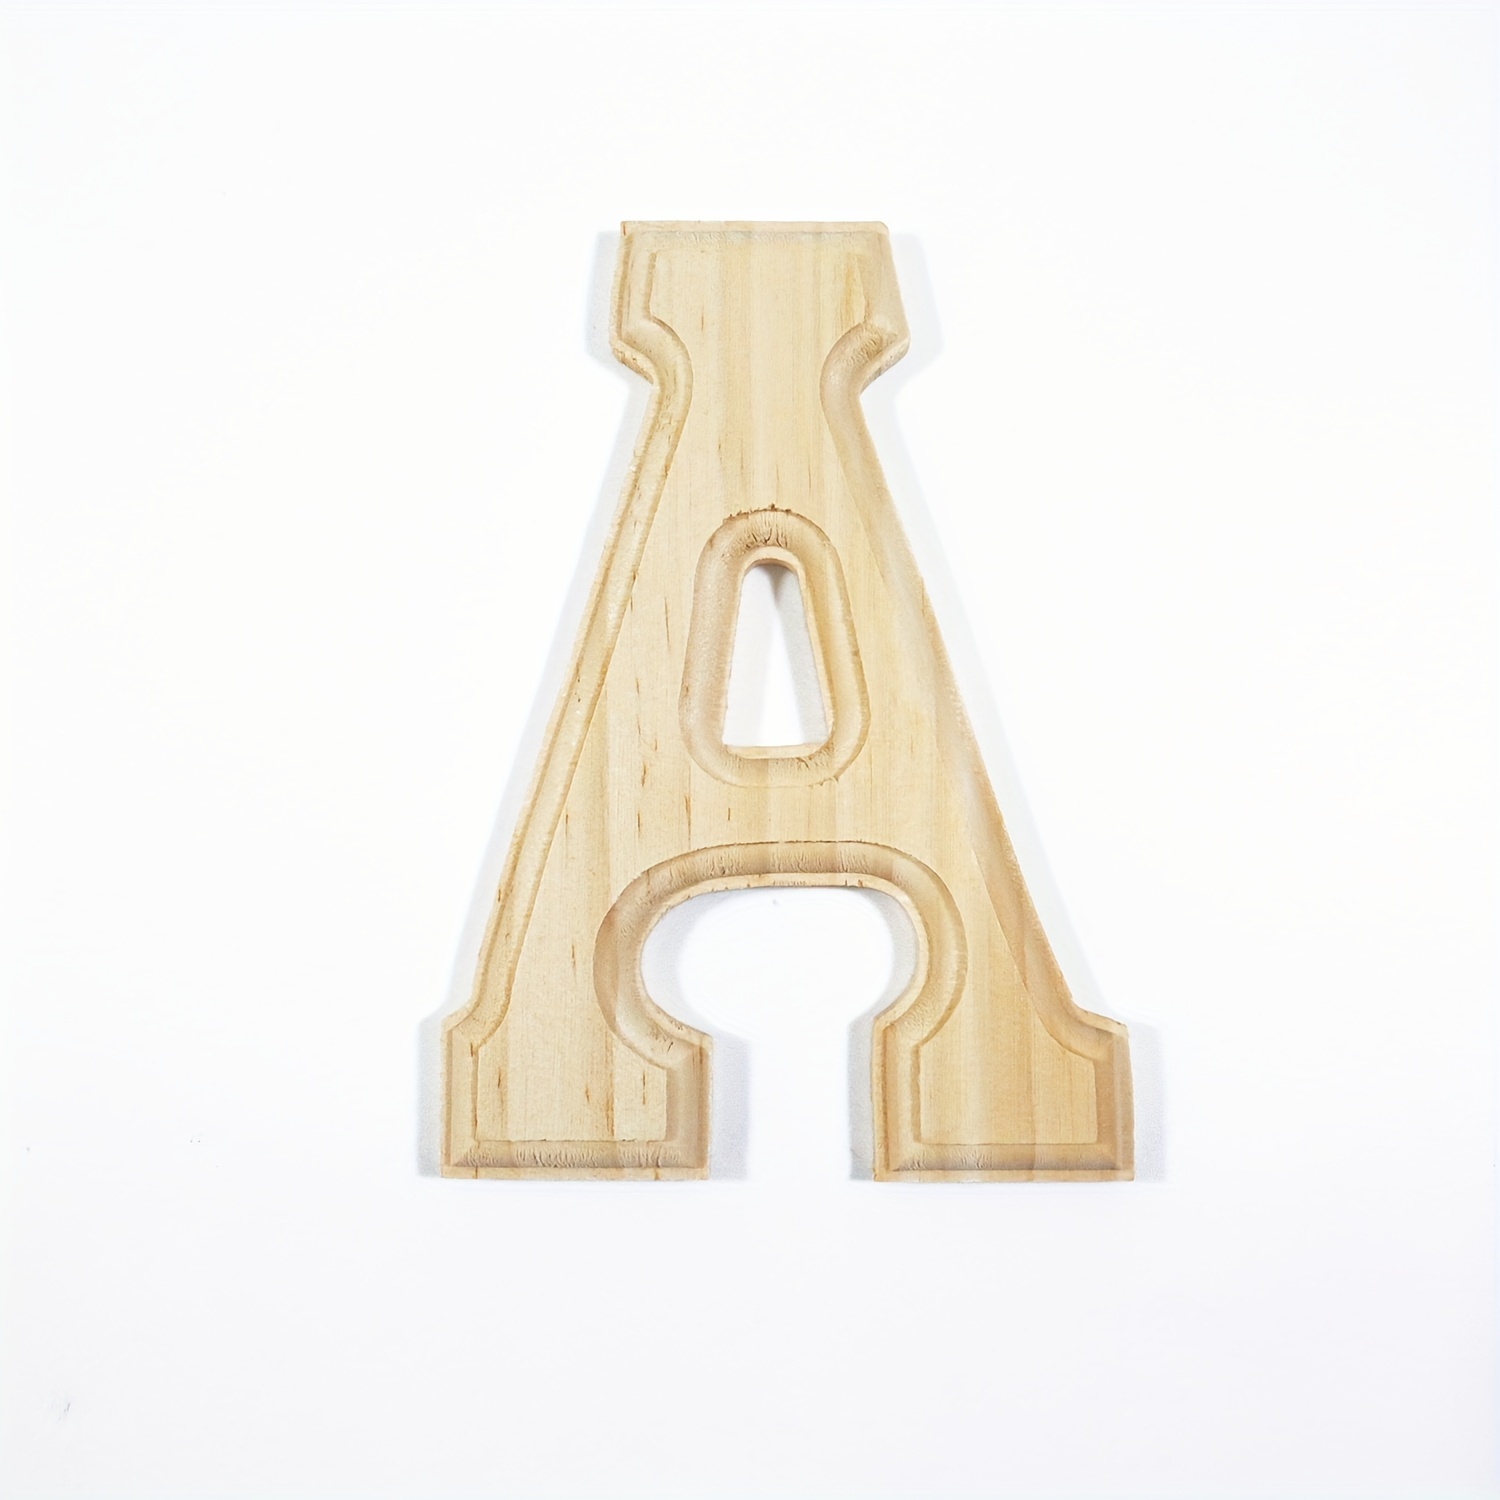  4 Inch Designable Wood Letters, Unfinished Wood Letters for  Wall Decor Decorative Paintable Decorative Letters Standing Letters Slices  Sign Board Decoration for Craft Home Party Projects : Toys & Games